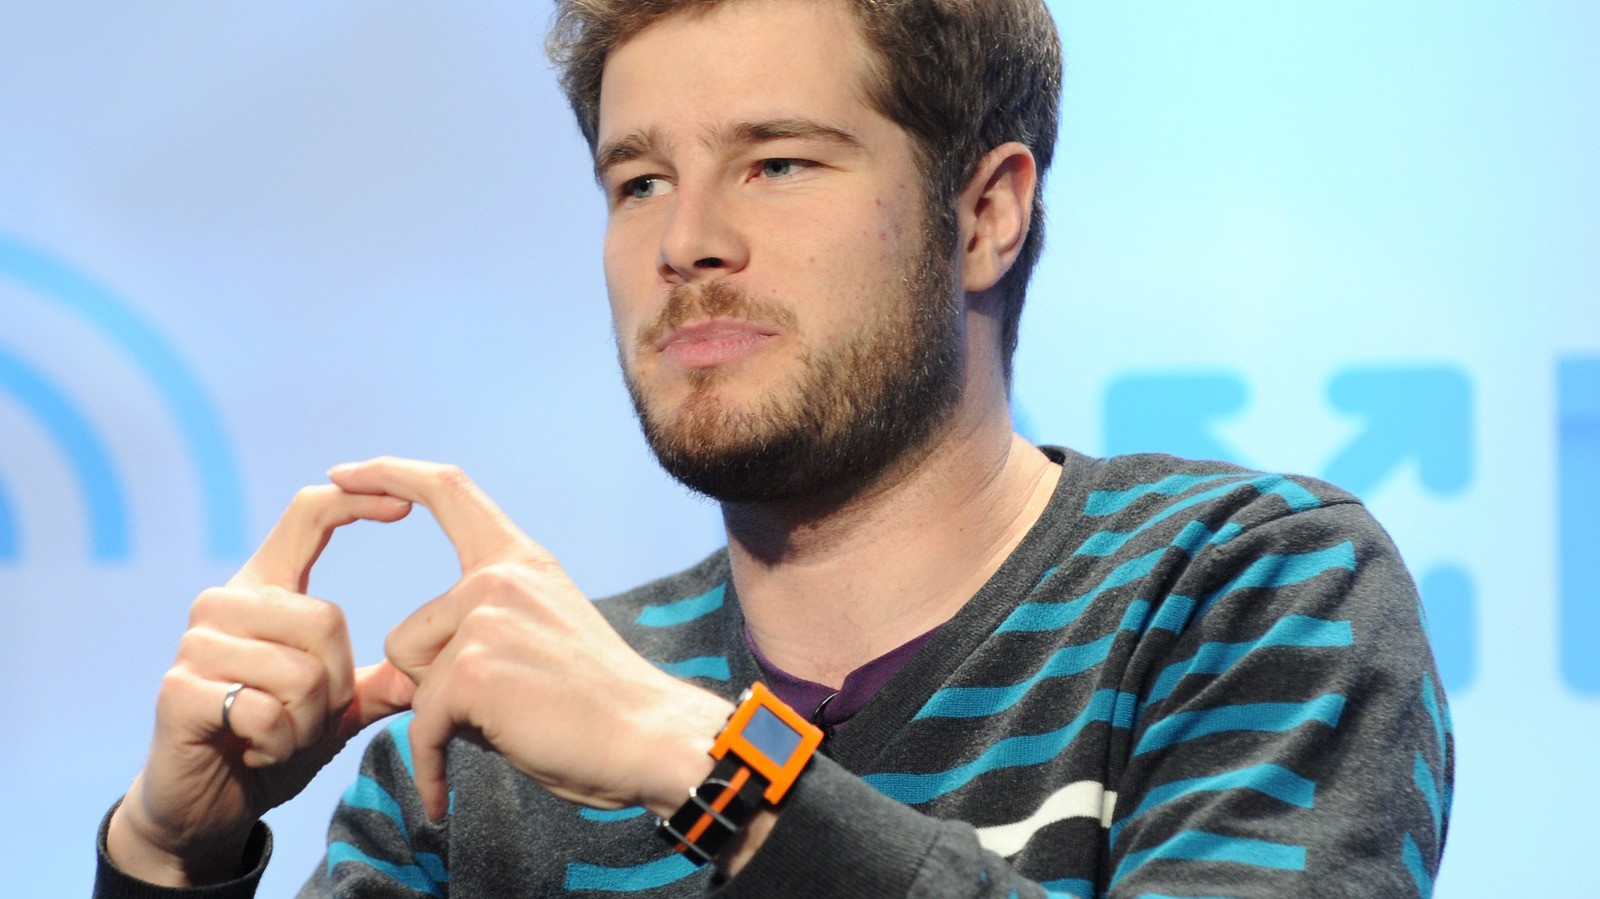 The Founder Of Pebble Wants To Create A New Practical And Compact Android Phone